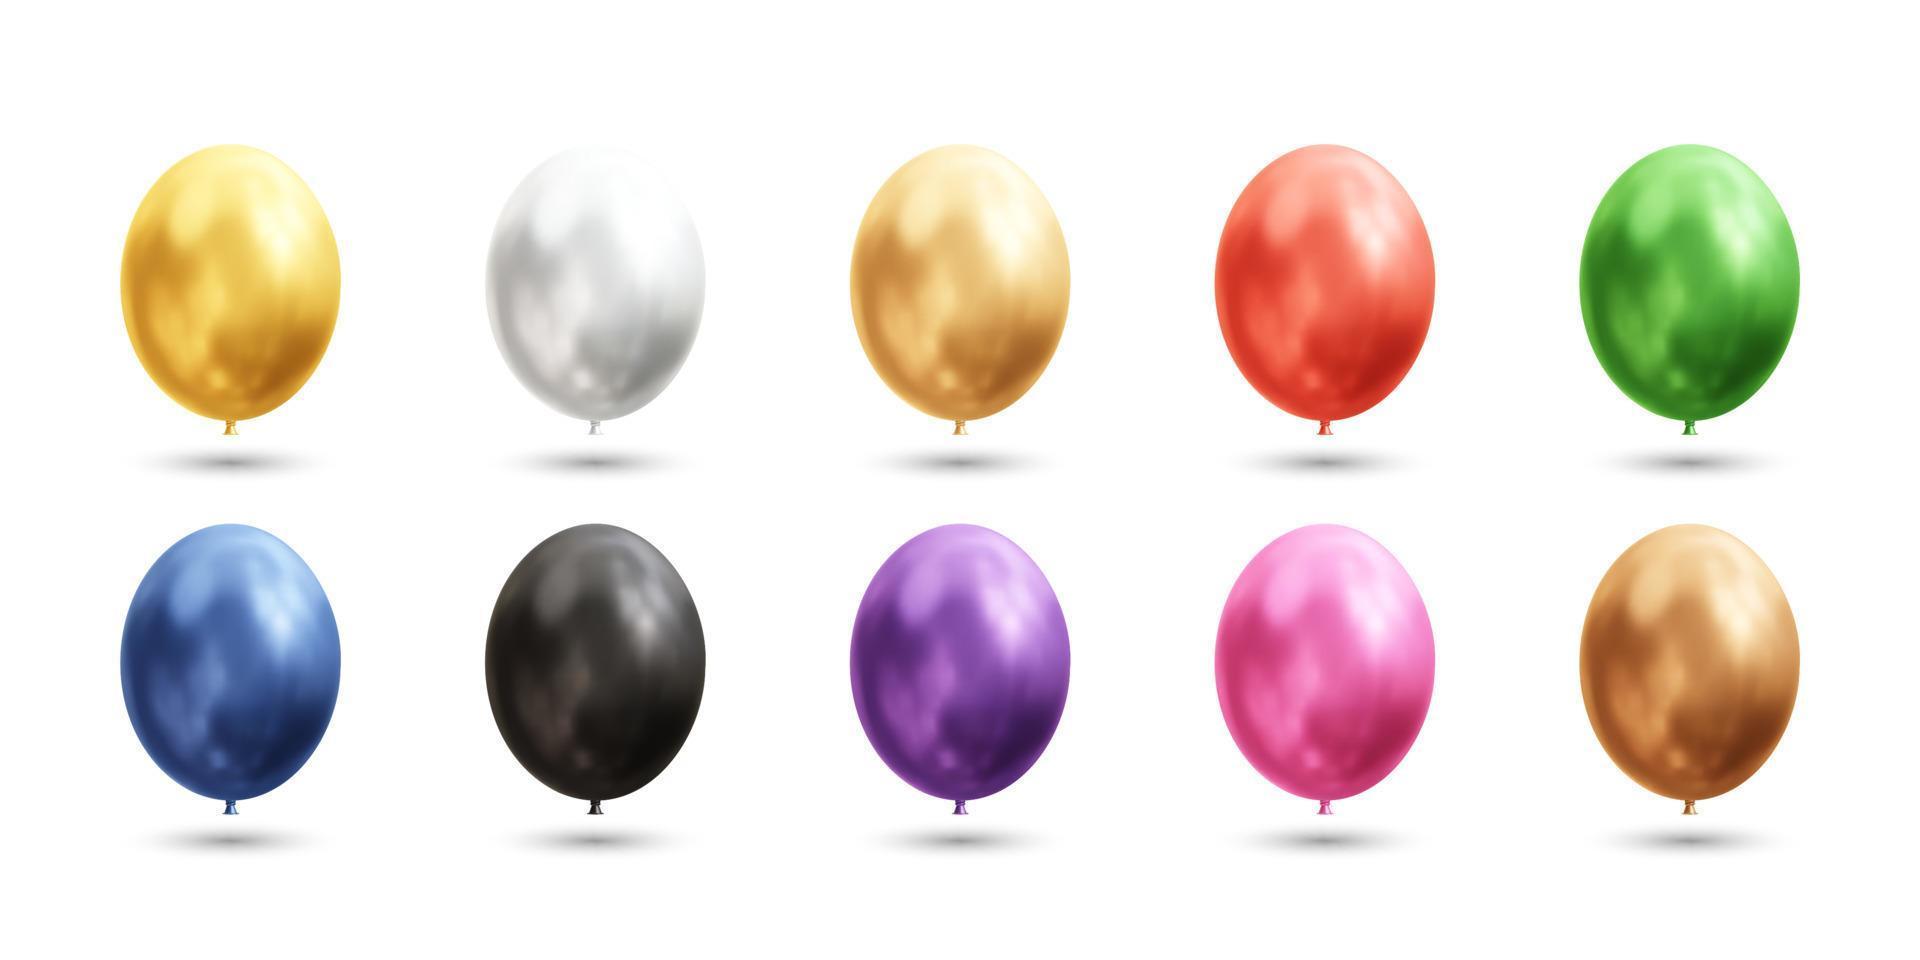 Colorful balloons realistic 3d vector object illustration